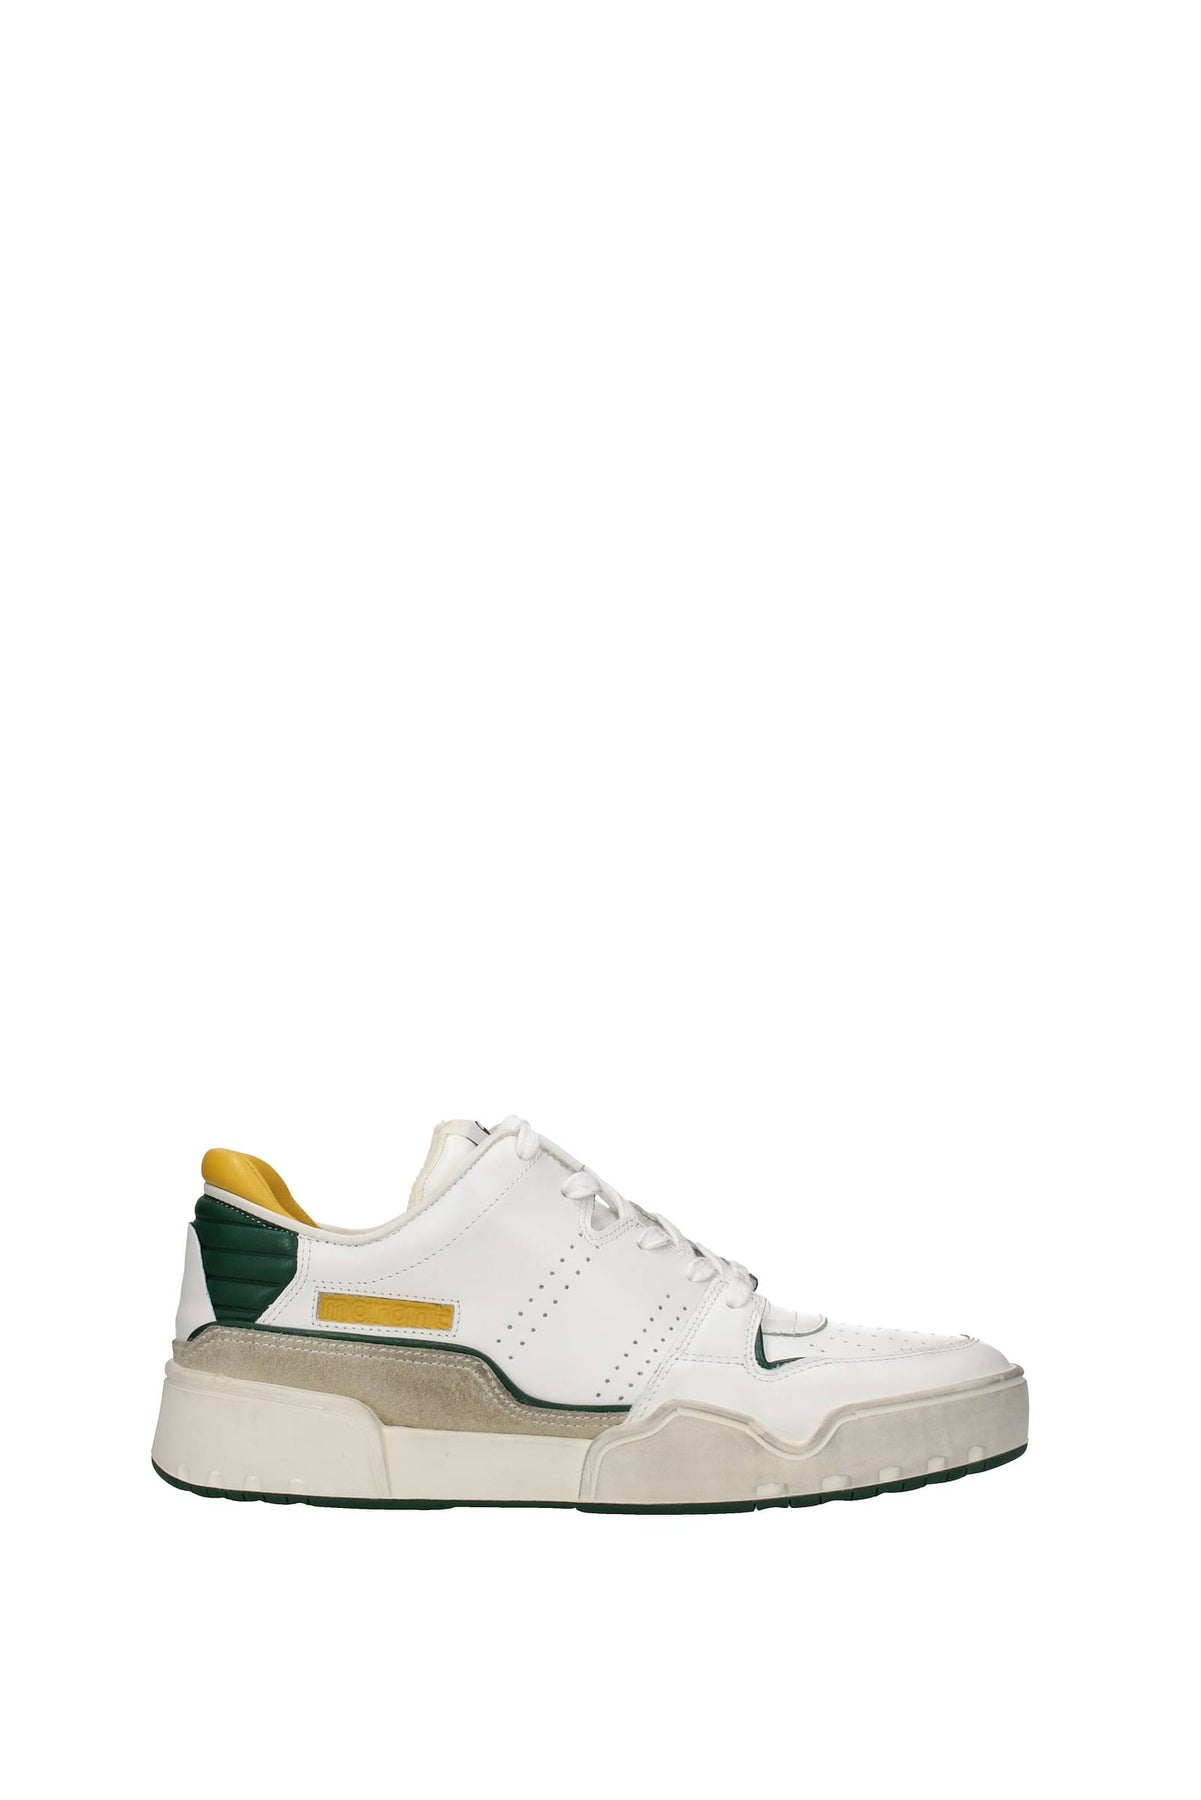 ISABEL MARANT SNEAKERS LEATHER YELLOW